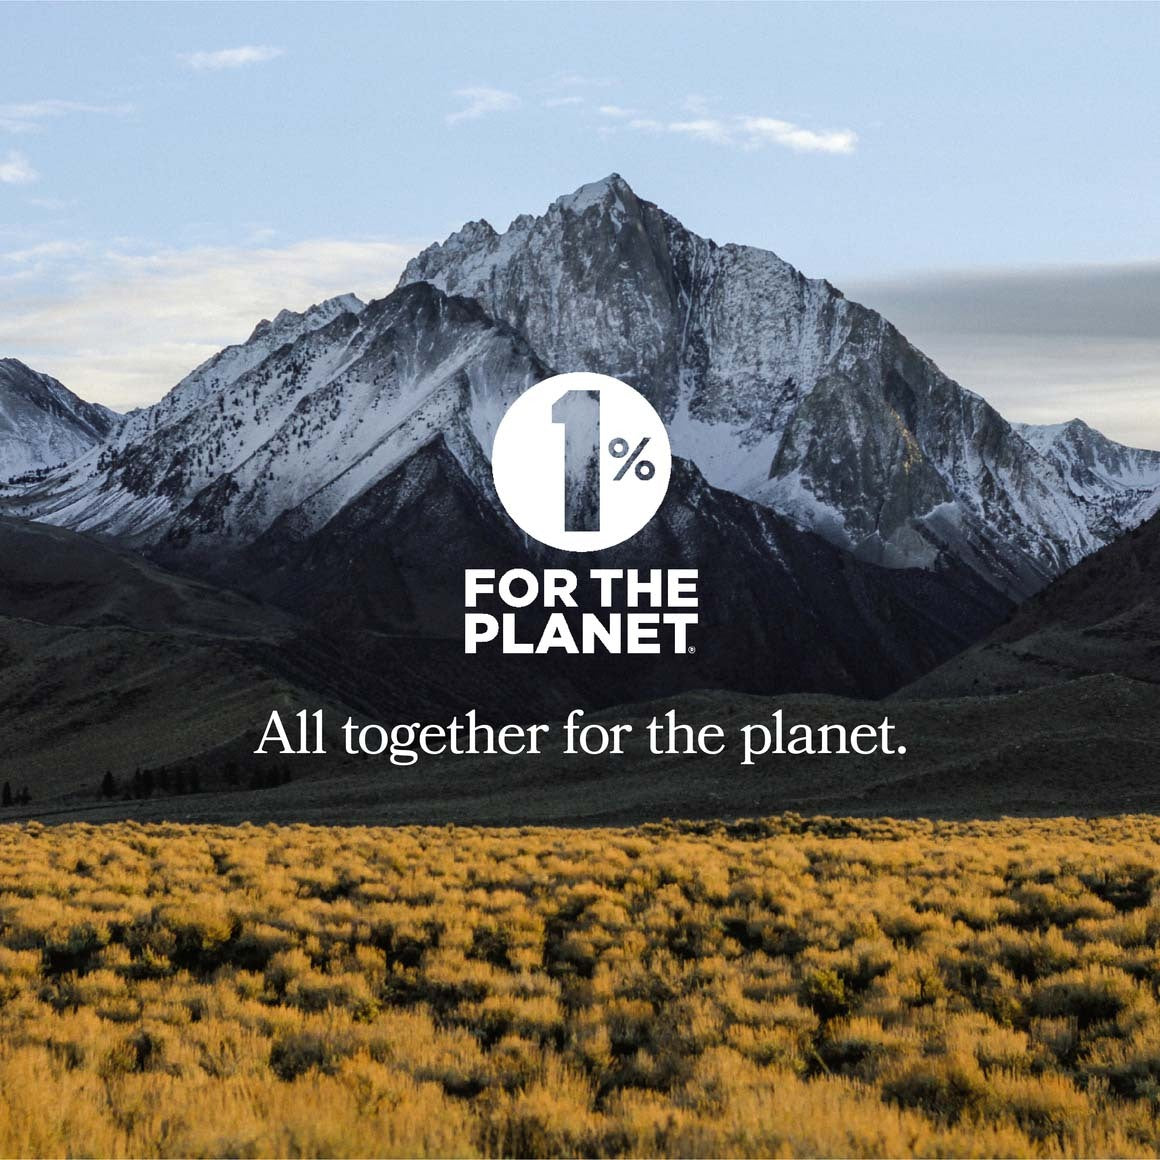 Photo of mountain range overlaid with 1% for the planet logo and motto: All together for the planet.